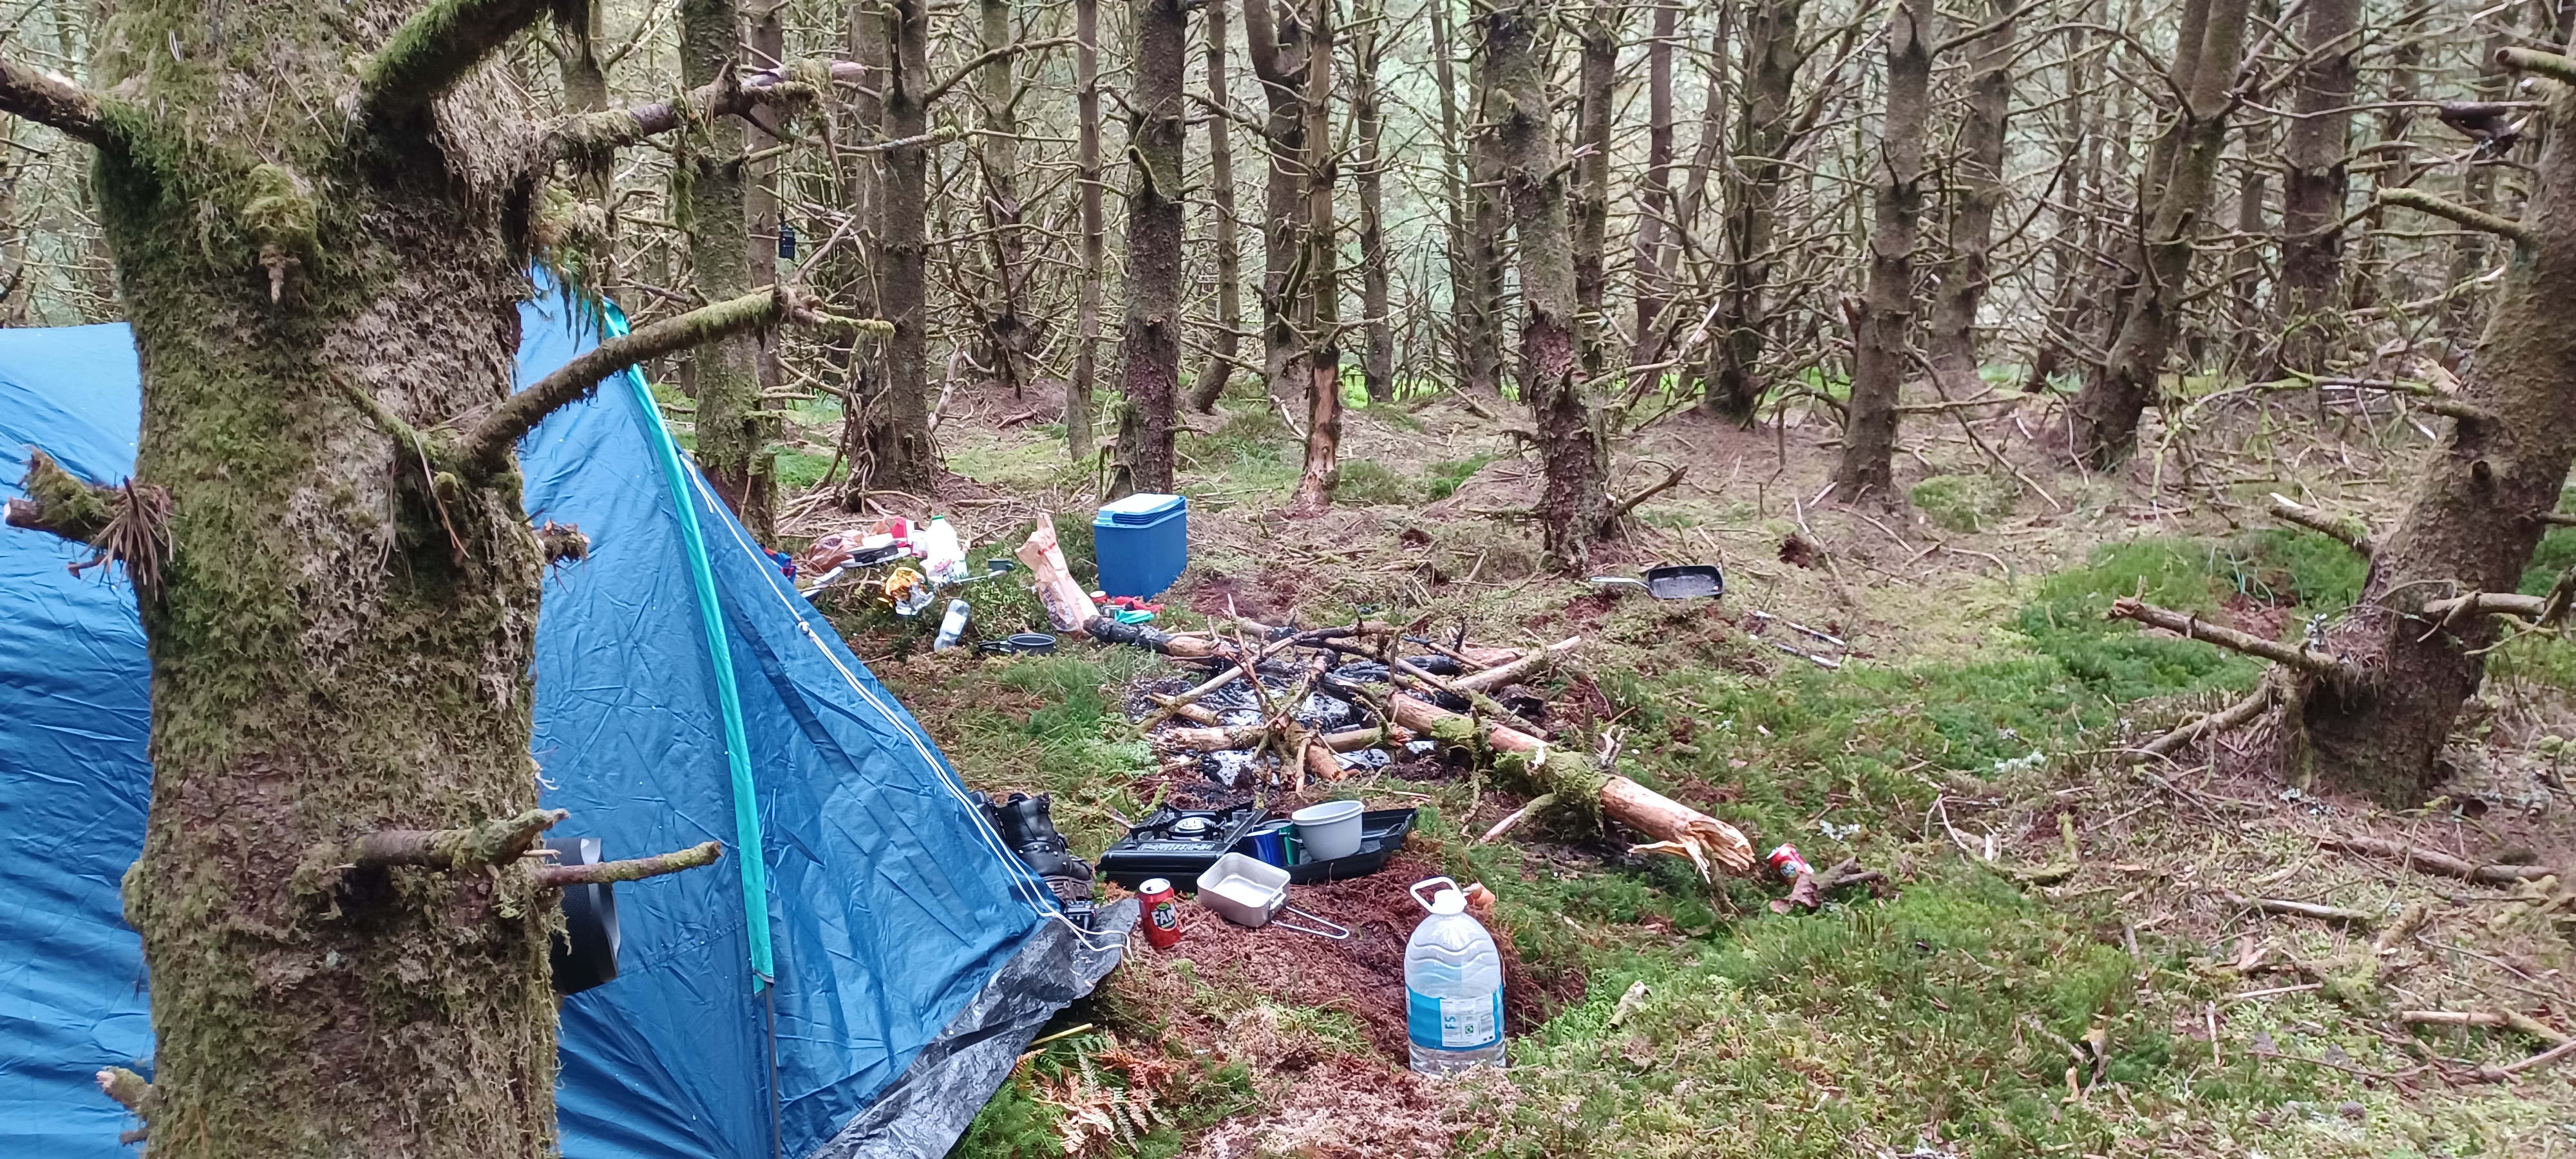 a trashed campsite in a forest